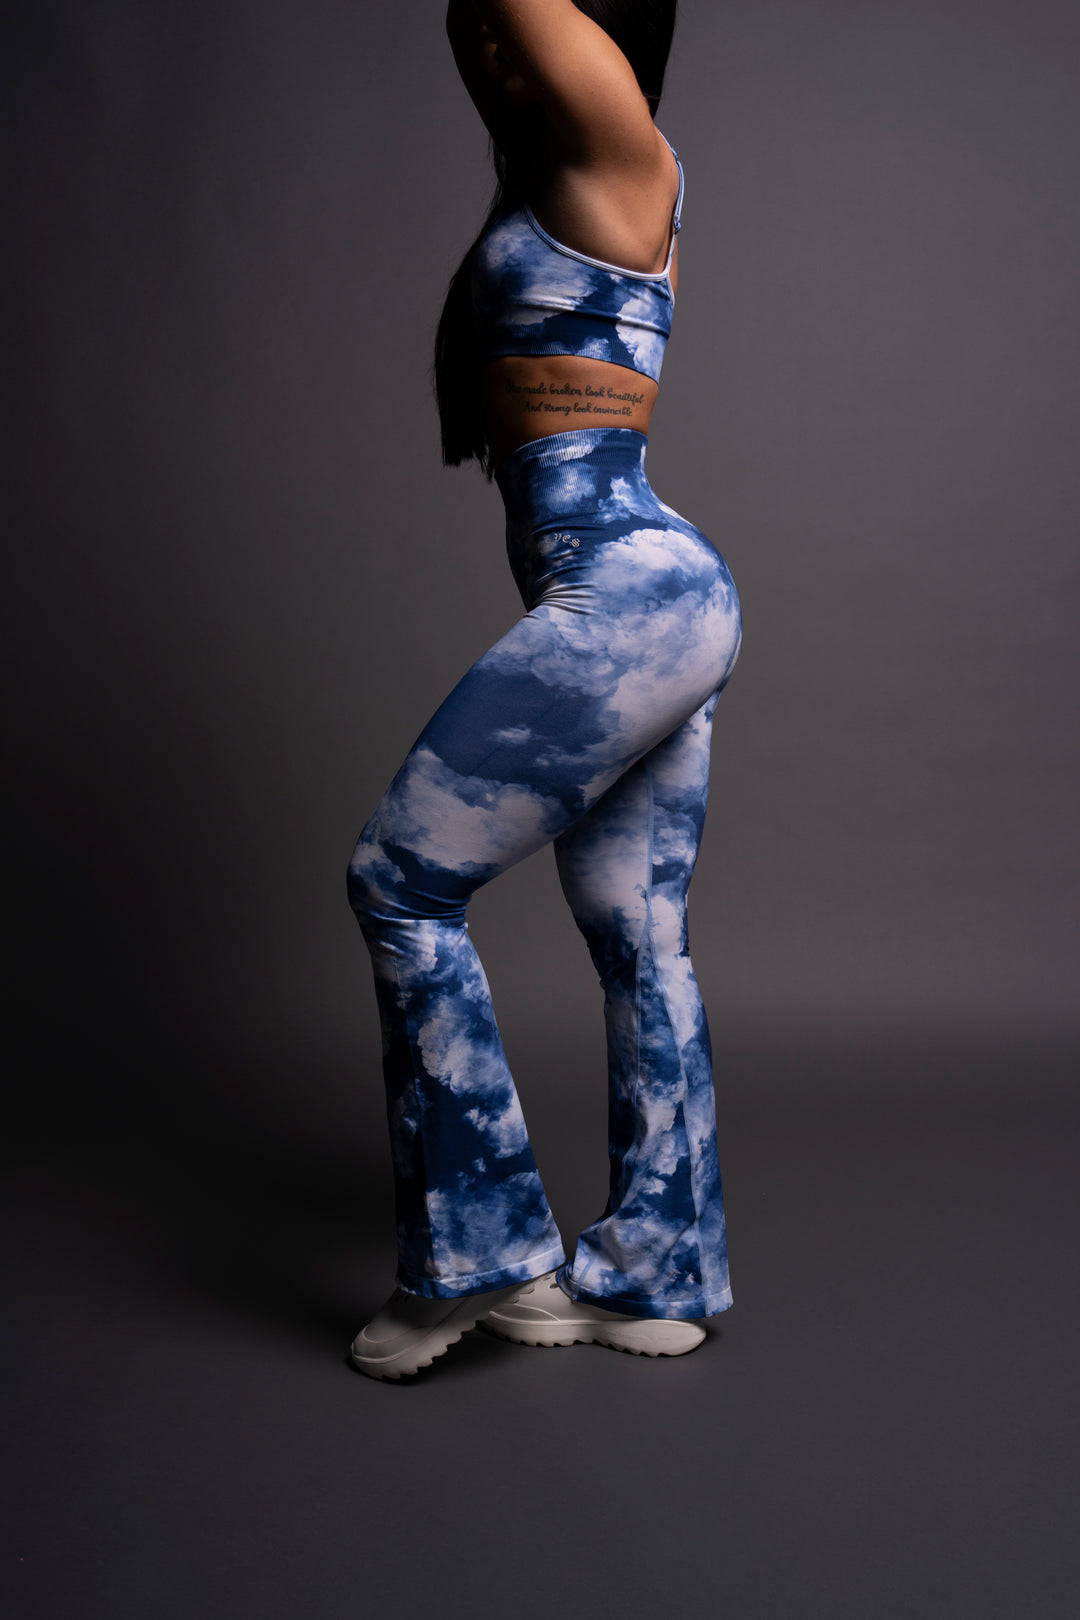 Our Stamp "Everson Seamless" Gracie Flare Scrunch Leggings in Blue Sky